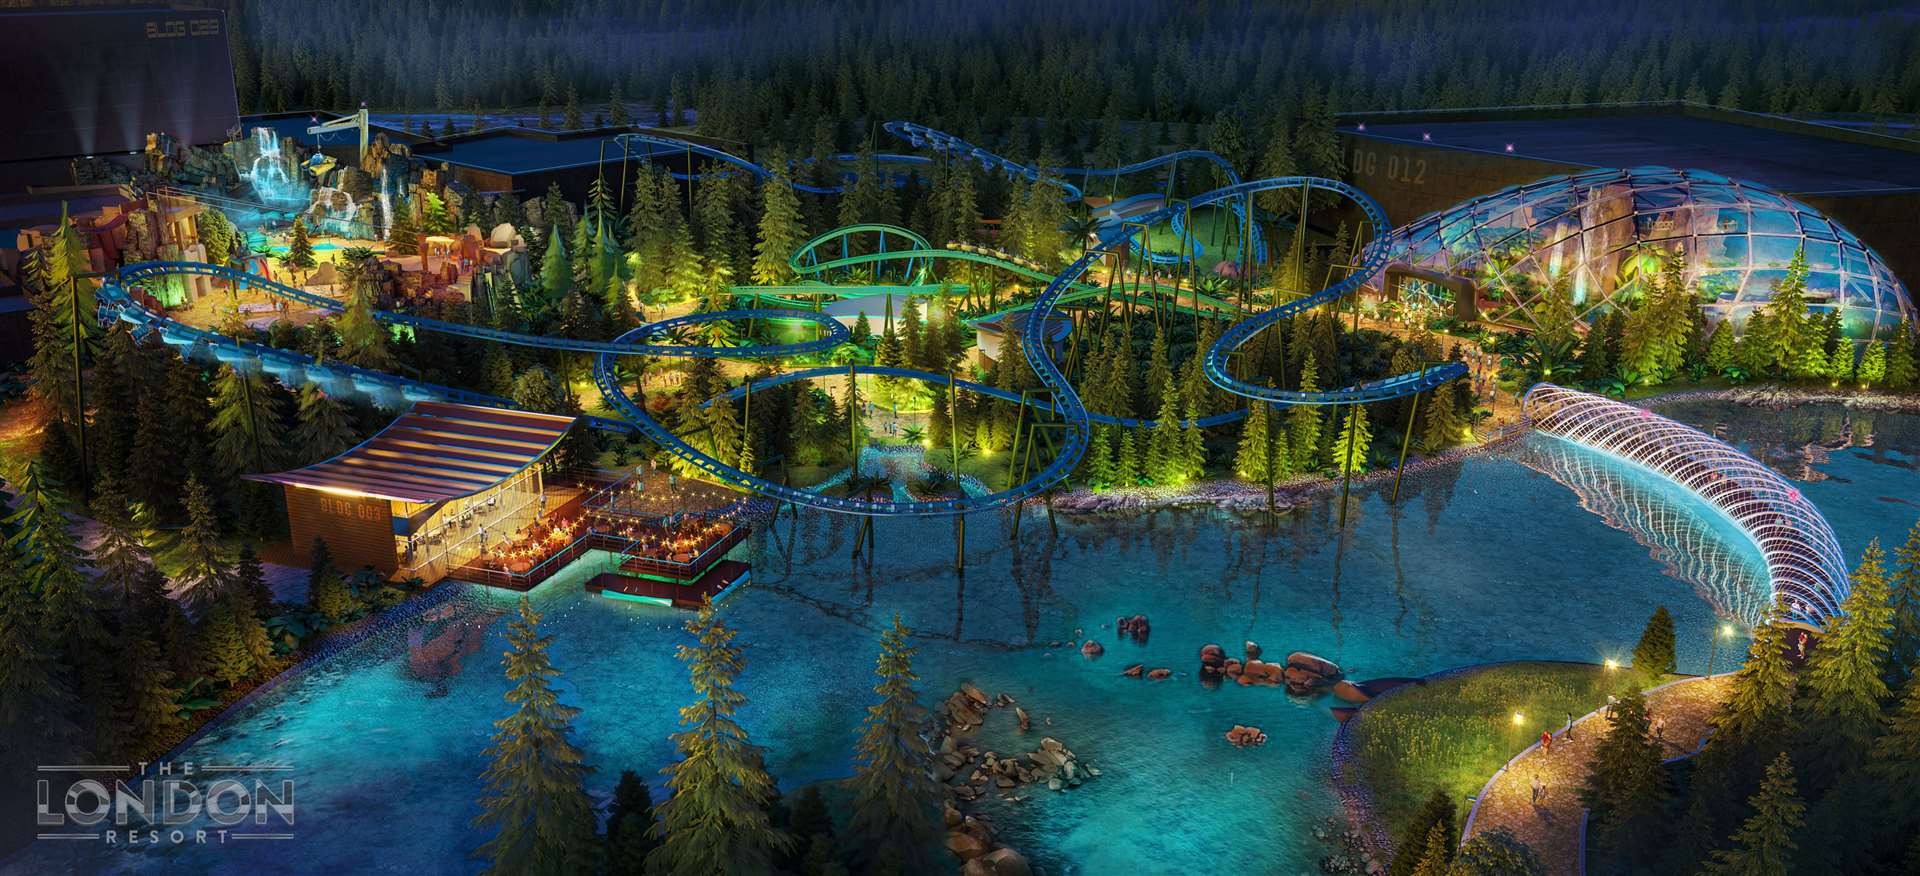 The London Resort has announced plans for a 'Base Camp' zone dedicated to dinosaur and prehistoric discovery